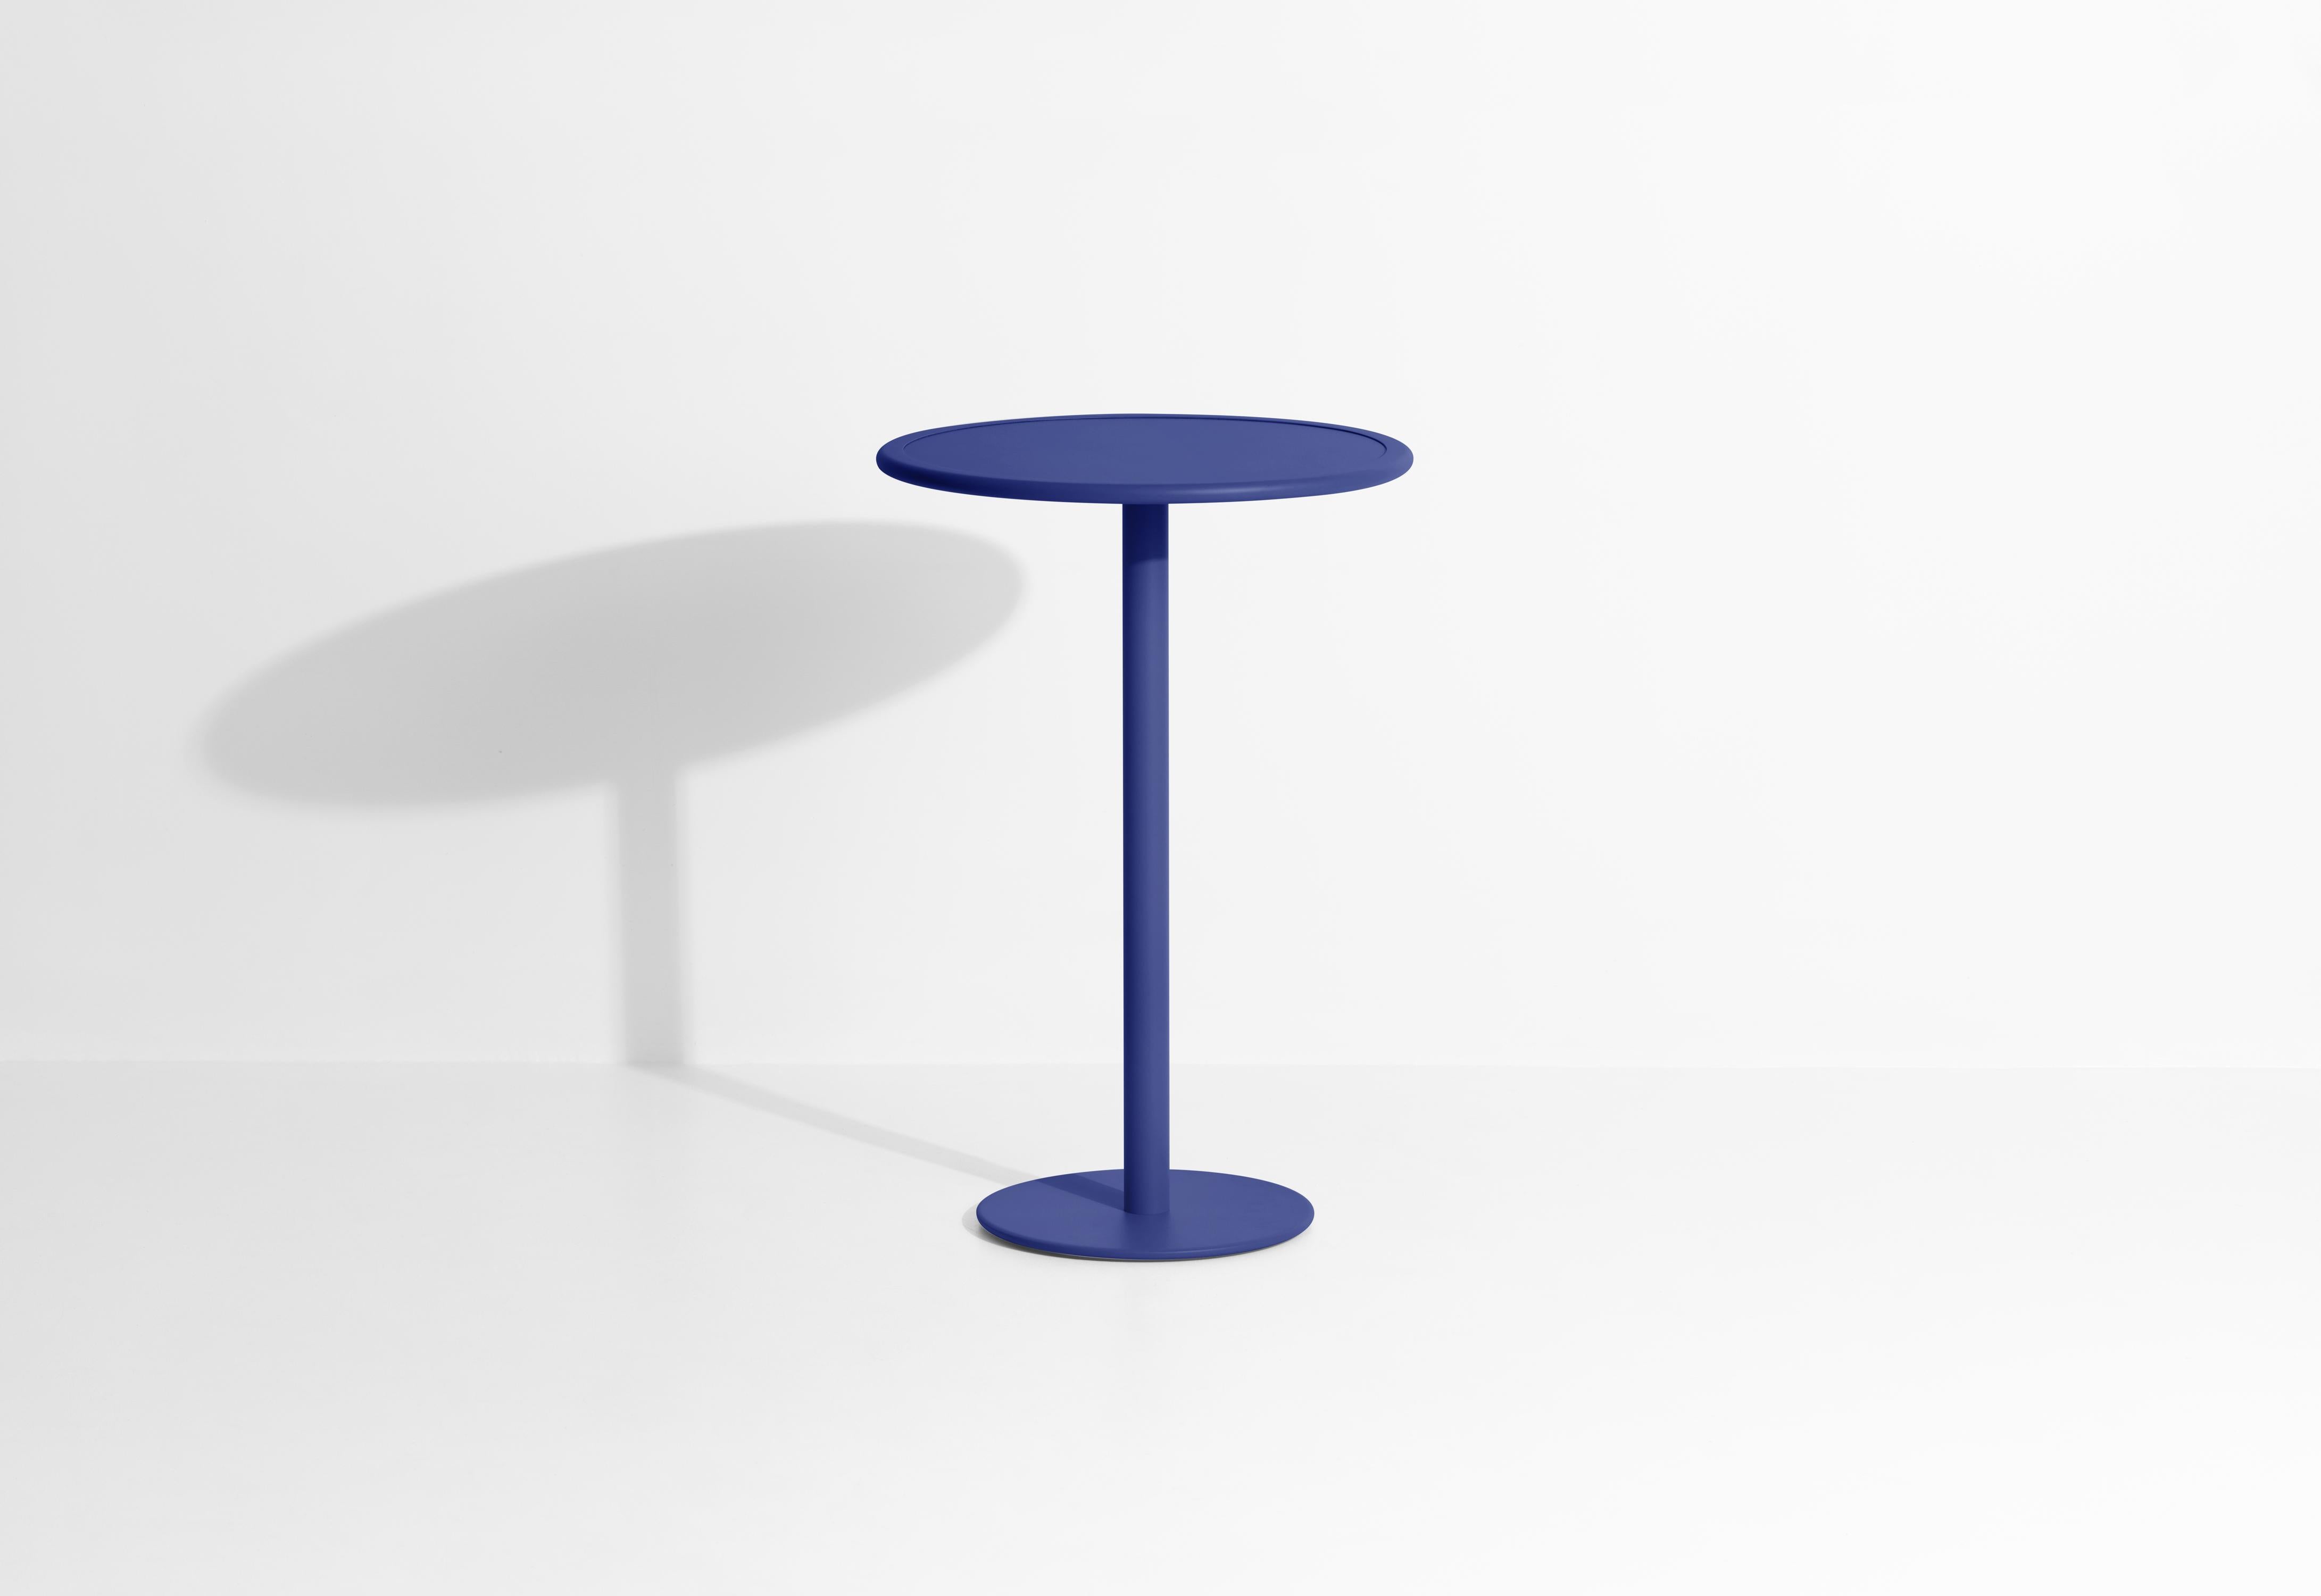 Petite Friture Week-End Round High Table in Blue Aluminium by Studio BrichetZiegler, 2017

The week-end collection is a full range of outdoor furniture, in aluminium grained epoxy paint, matt finish, that includes 18 functions and 8 colours for